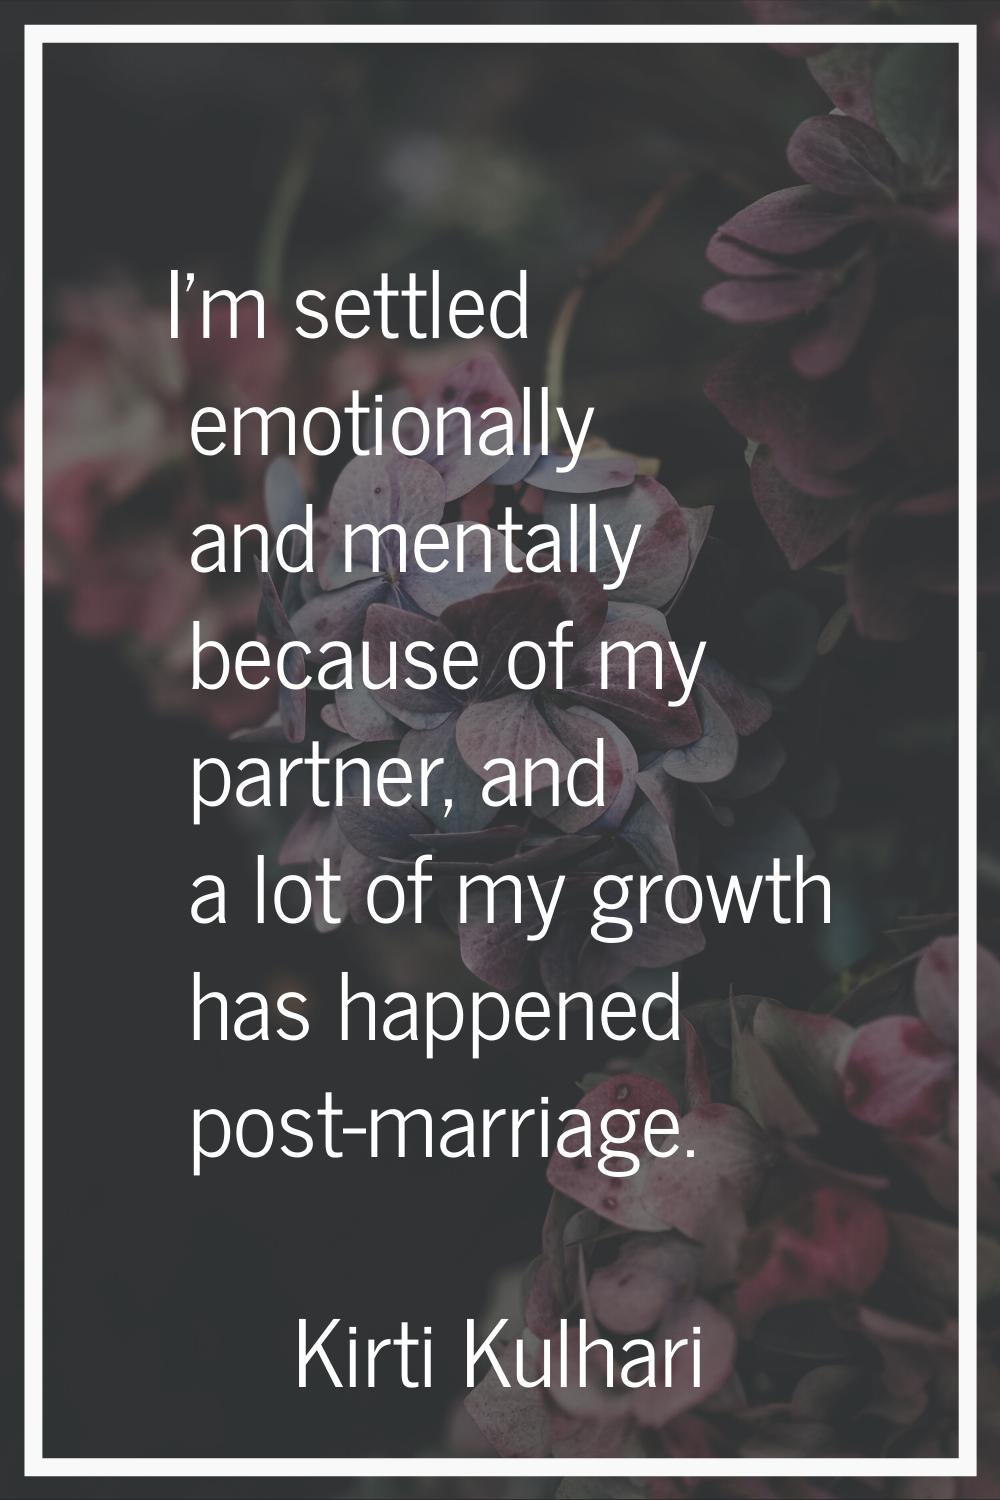 I'm settled emotionally and mentally because of my partner, and a lot of my growth has happened pos